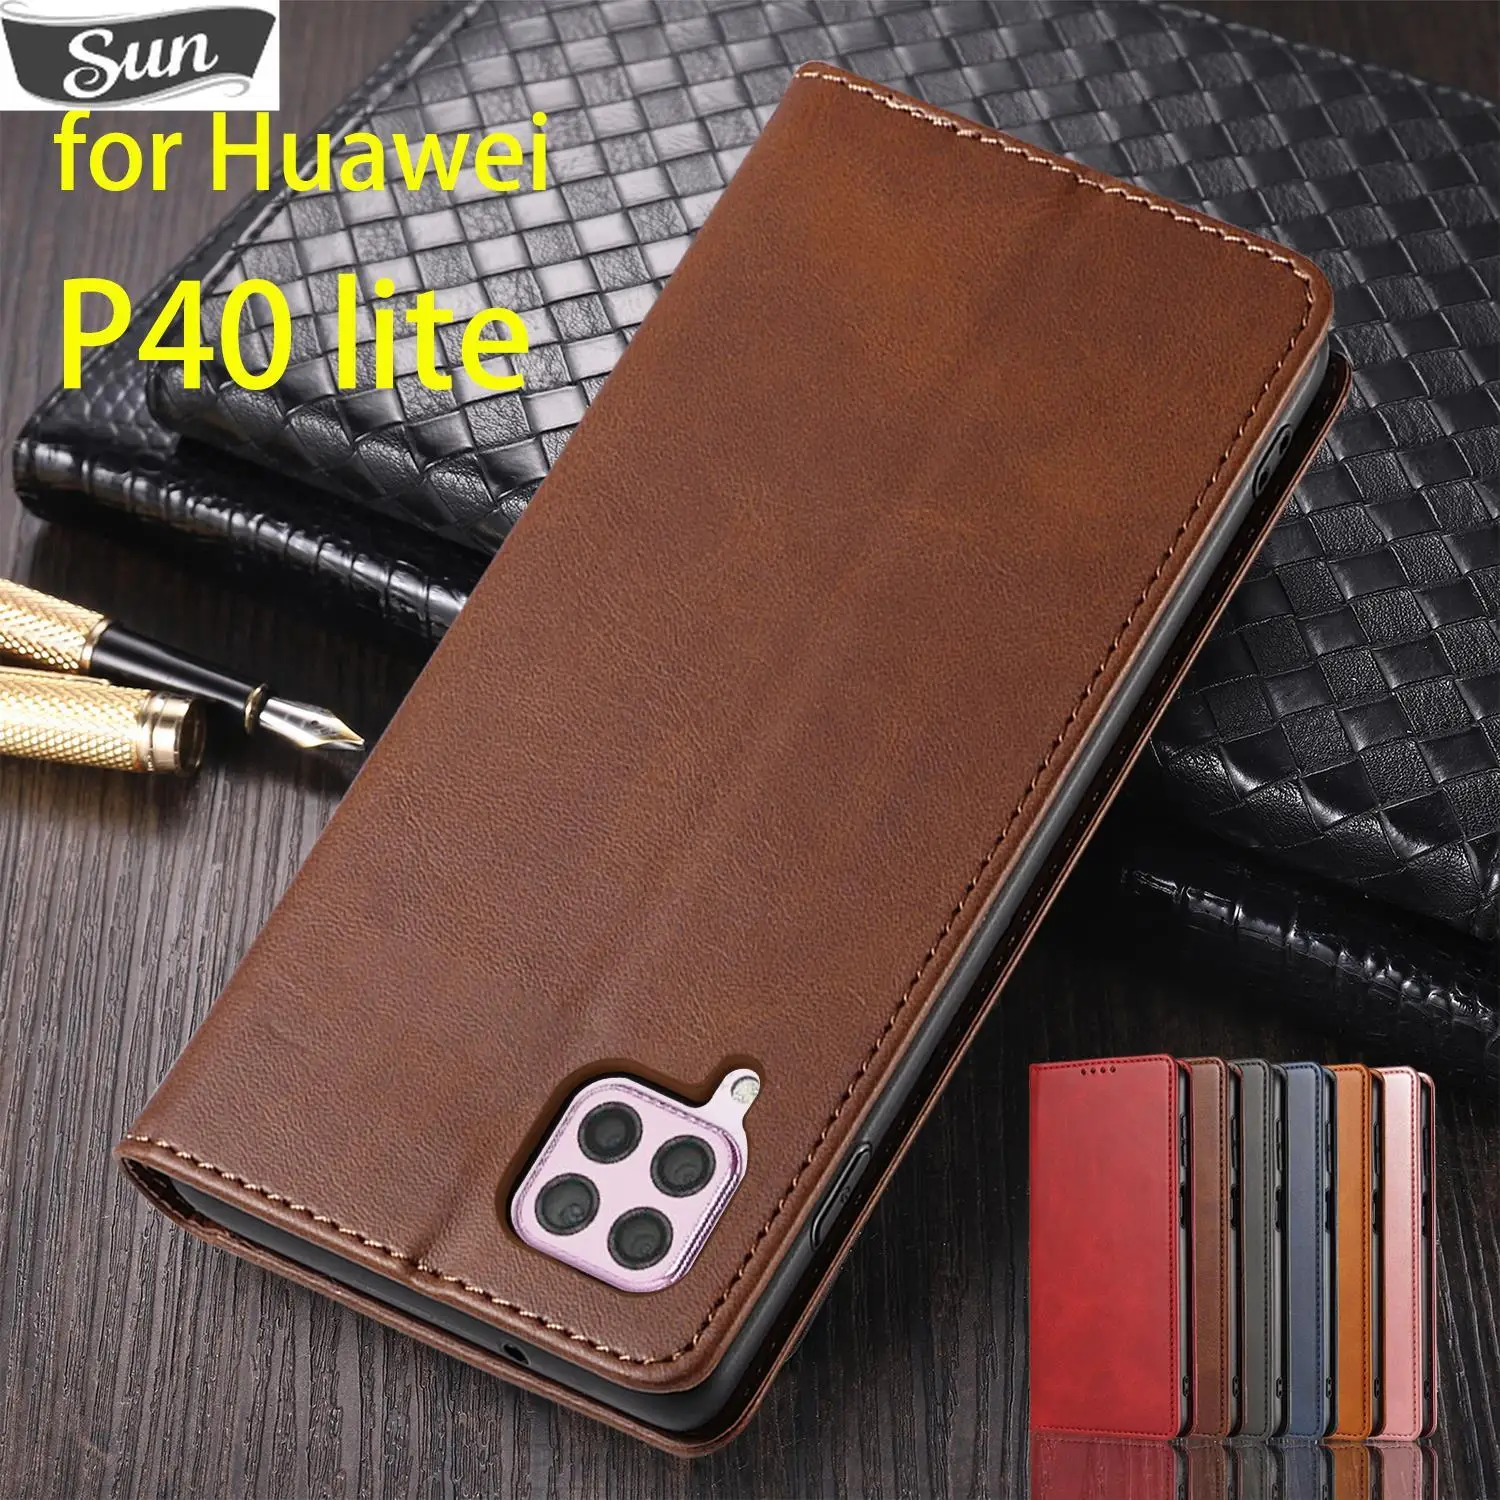 

Magnetic Attraction Cover Leather Case for Huawei P40 lite 6.4" Flip Case Card Holder Holster Case Wallet Case Fundas Coque